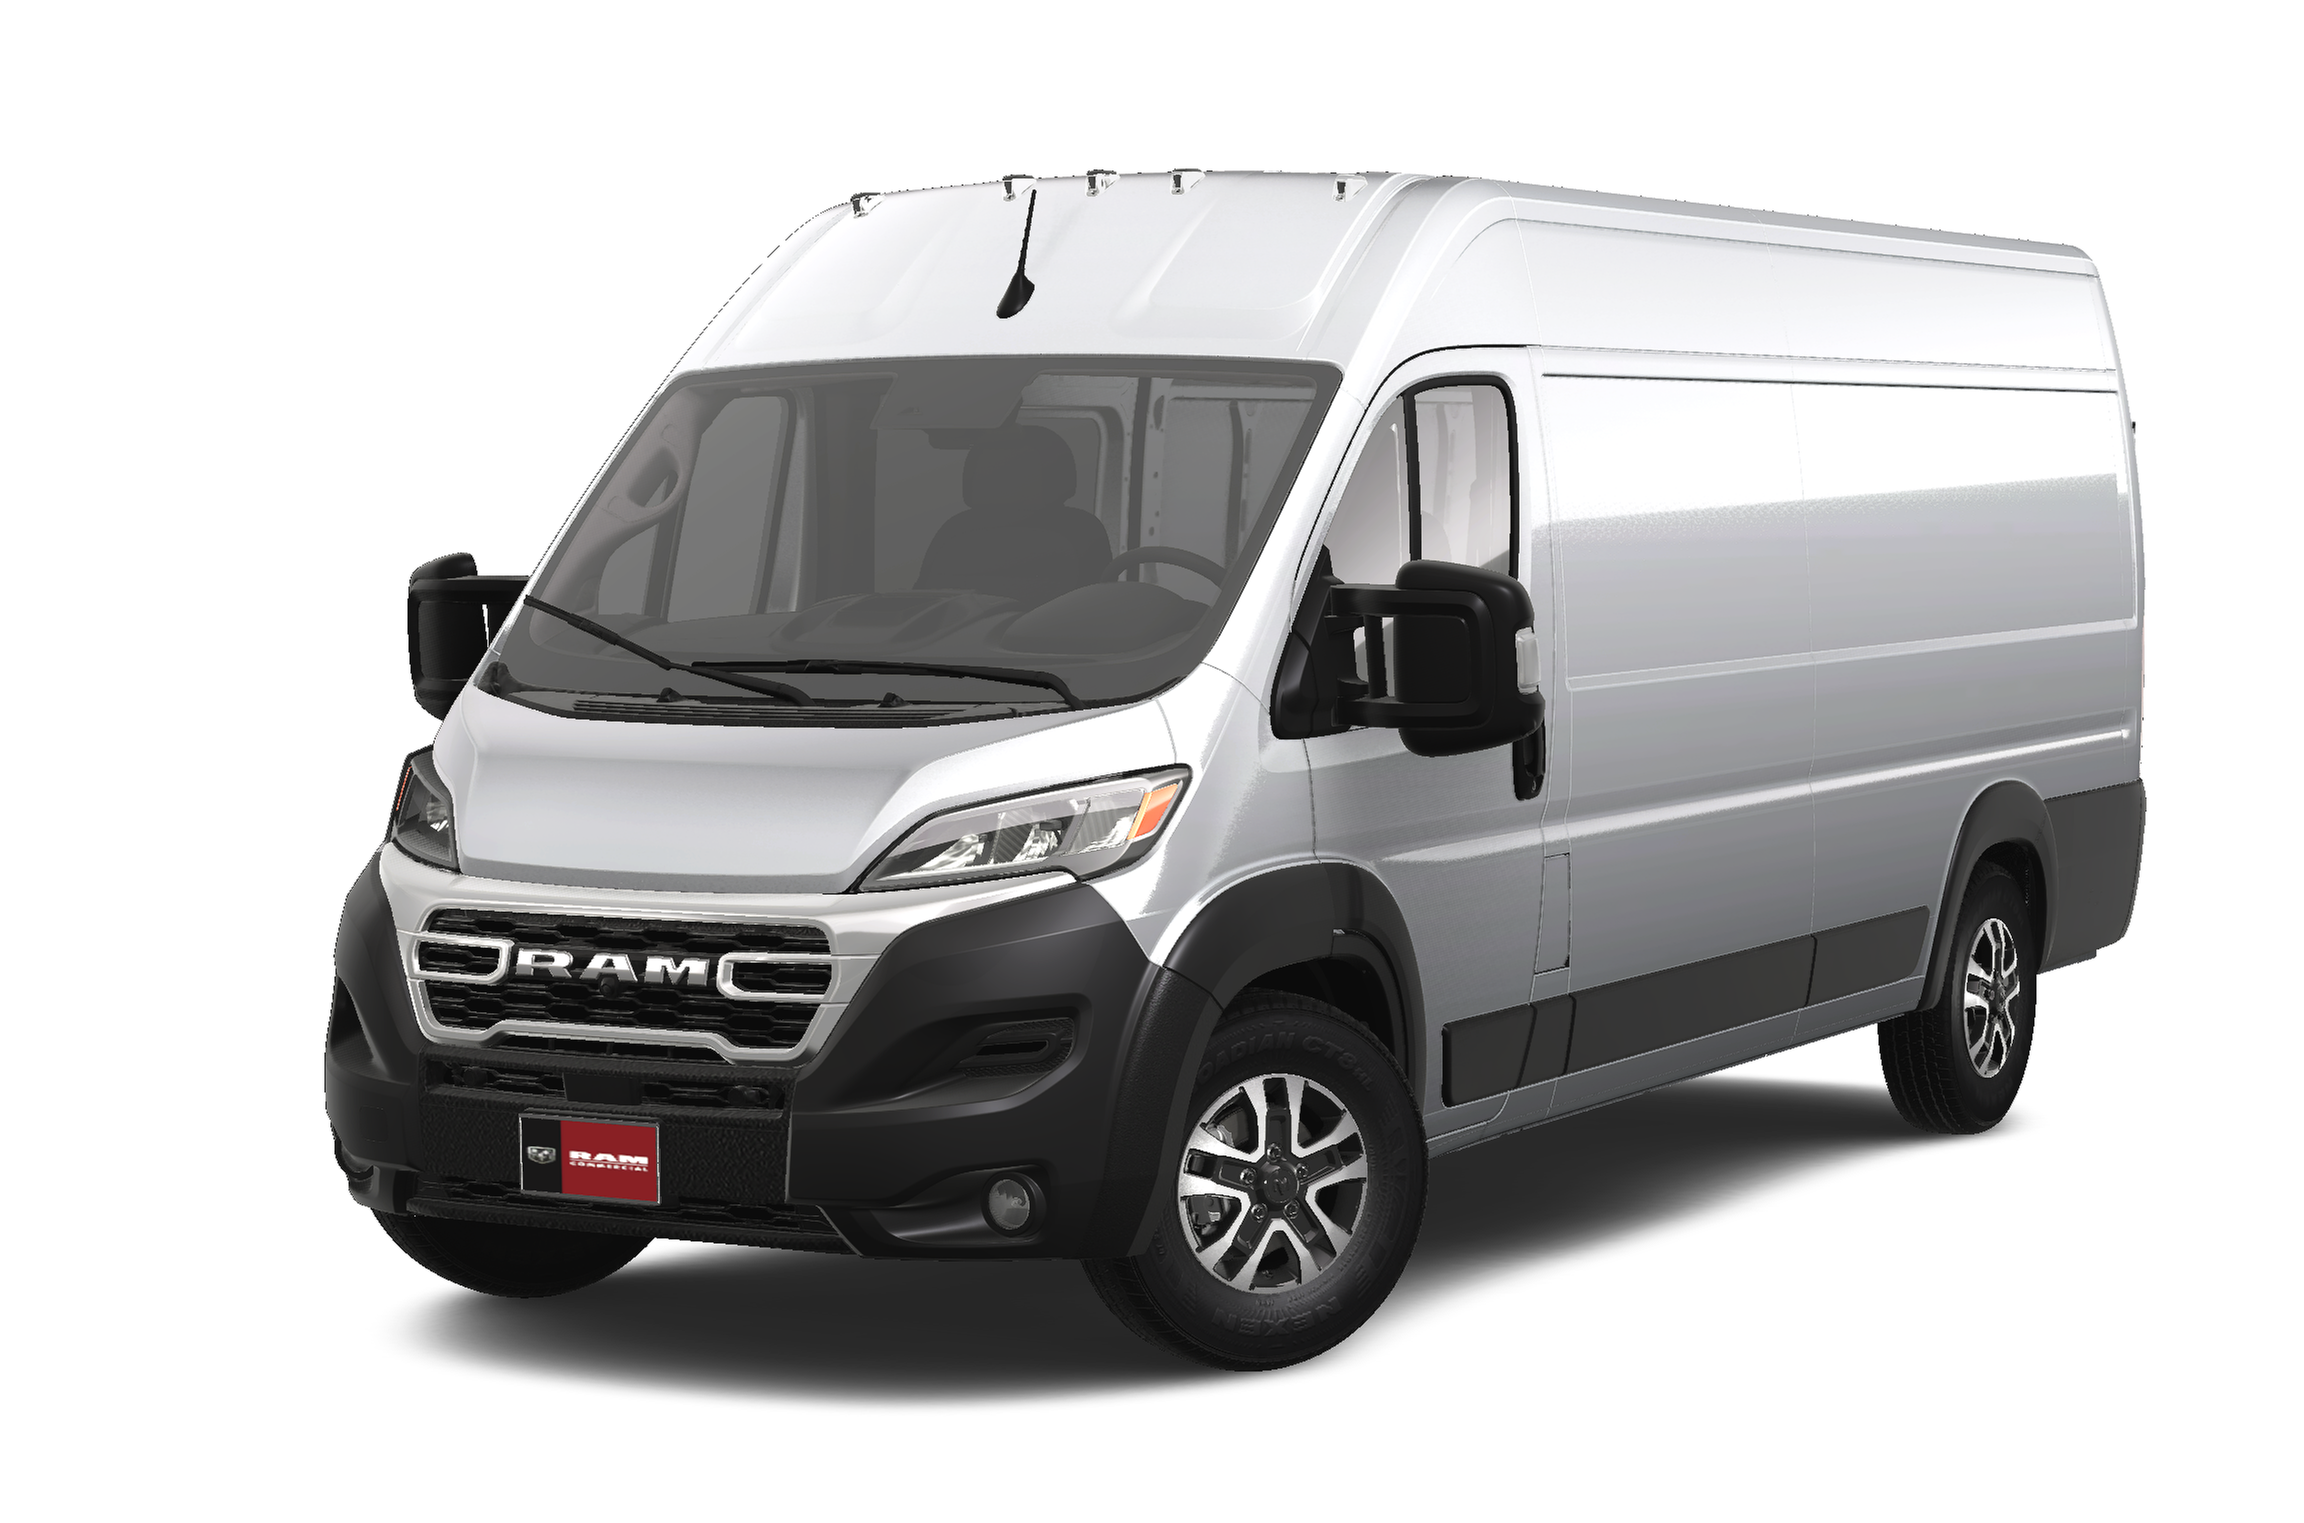 New 2023 RAM ProMaster Extended 159X WB Extended Cargo Van in The Dalles  #503305 | C. H. Urness Motors Co.